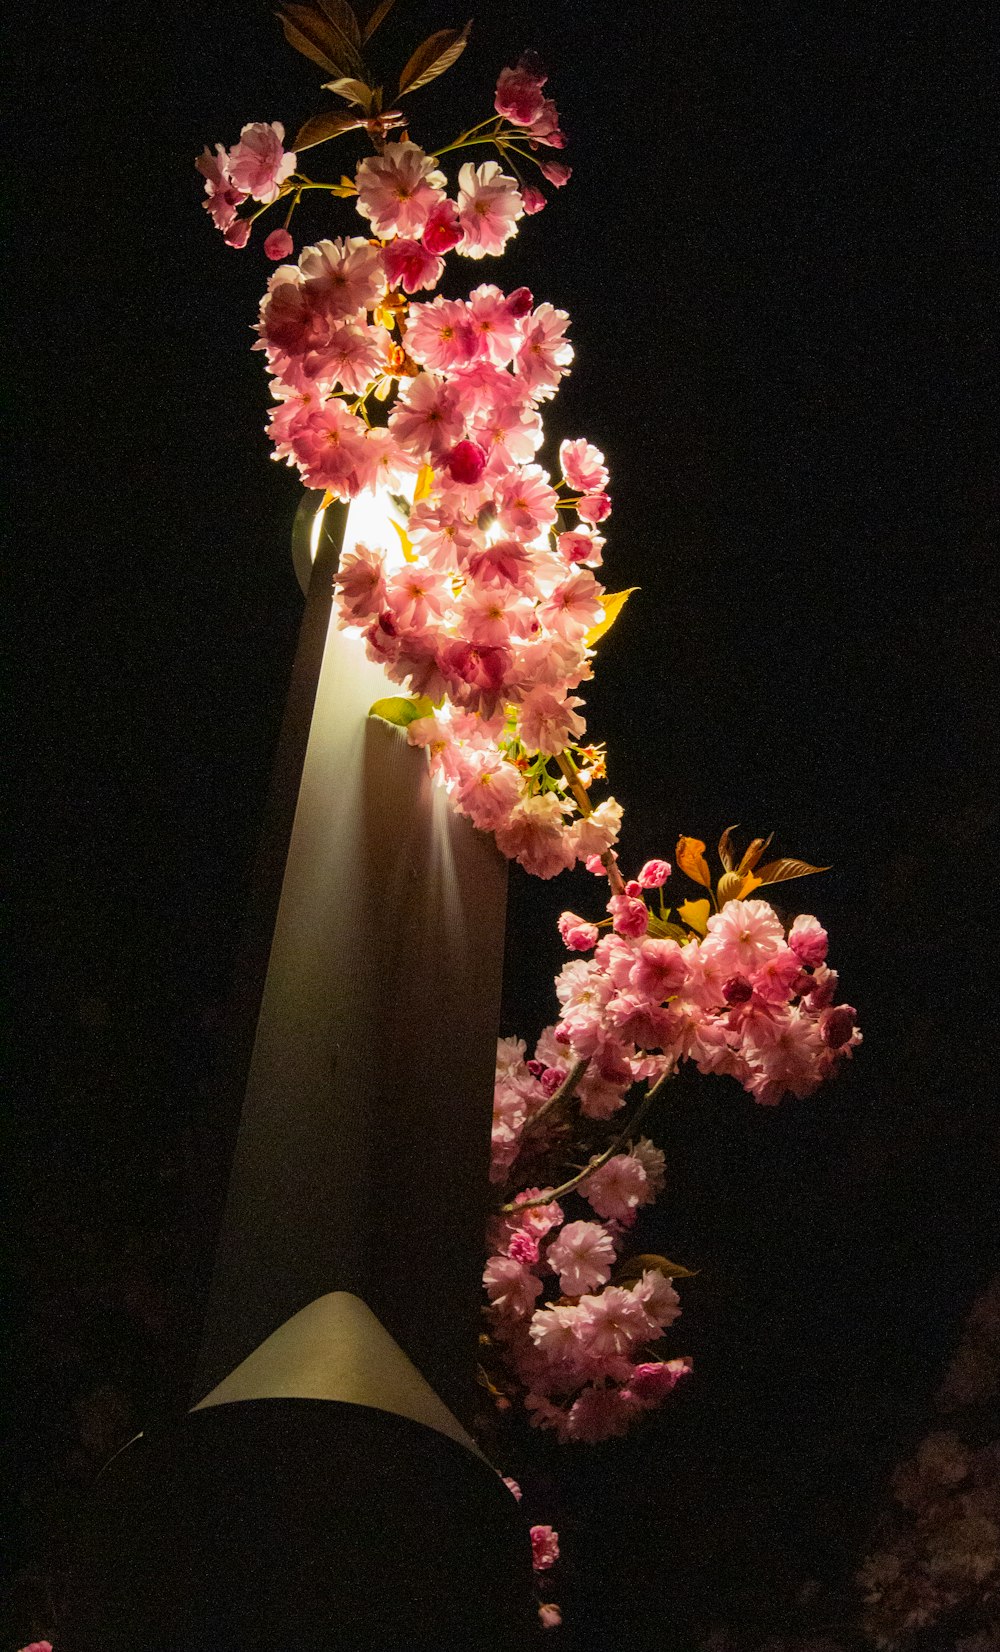 a tall light pole with a bunch of flowers on it